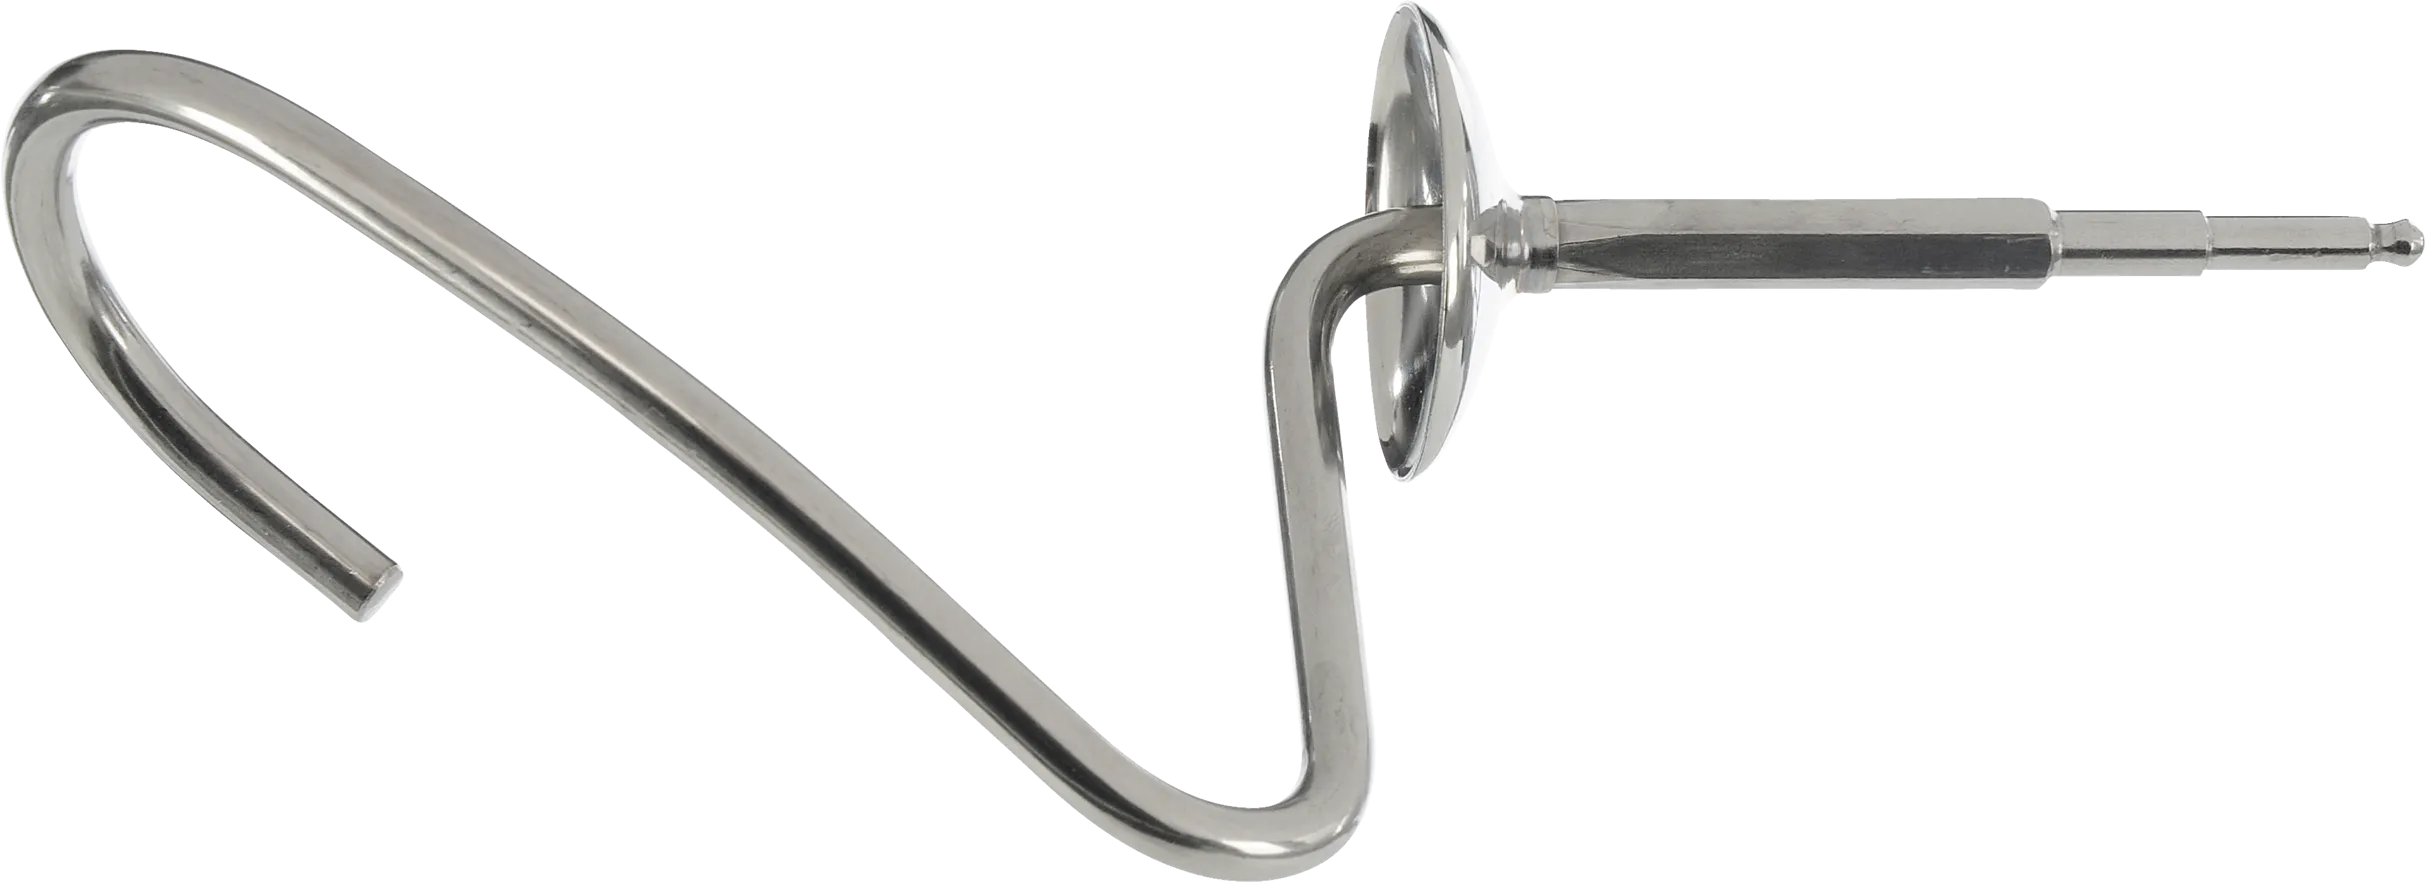 Kneading hook For MUM86 and MUMX models Stainless steel kneading hook 